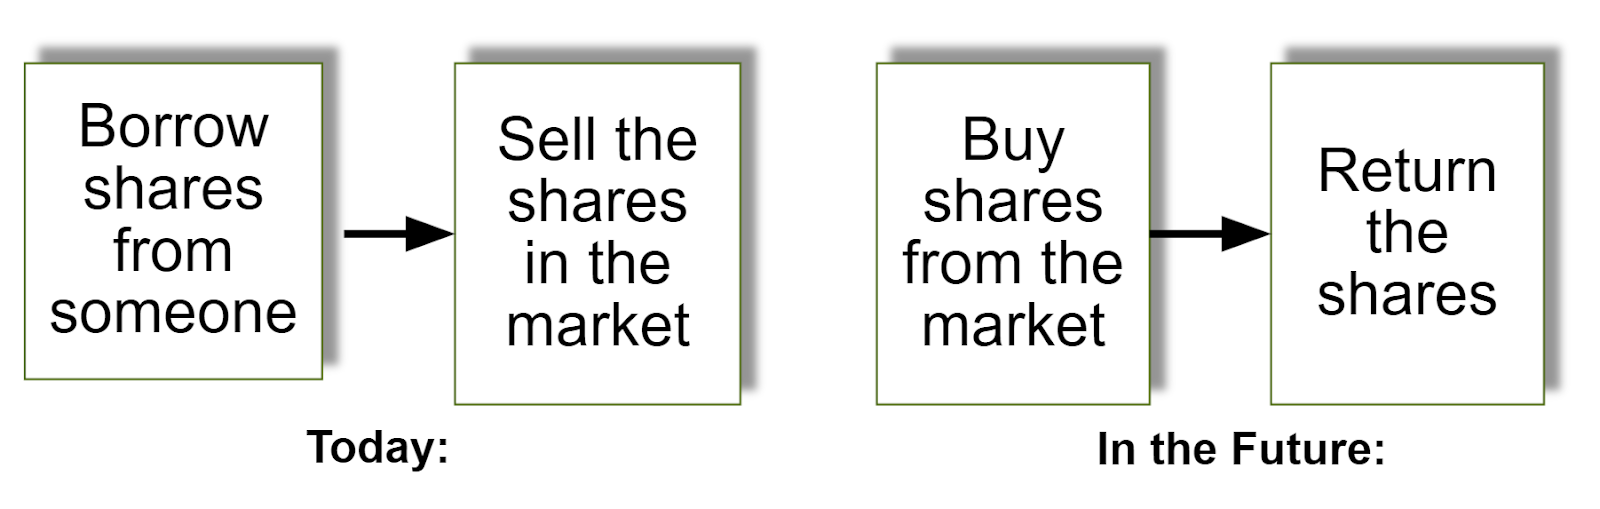 Selling short explained: "Sell High, Buy Low"